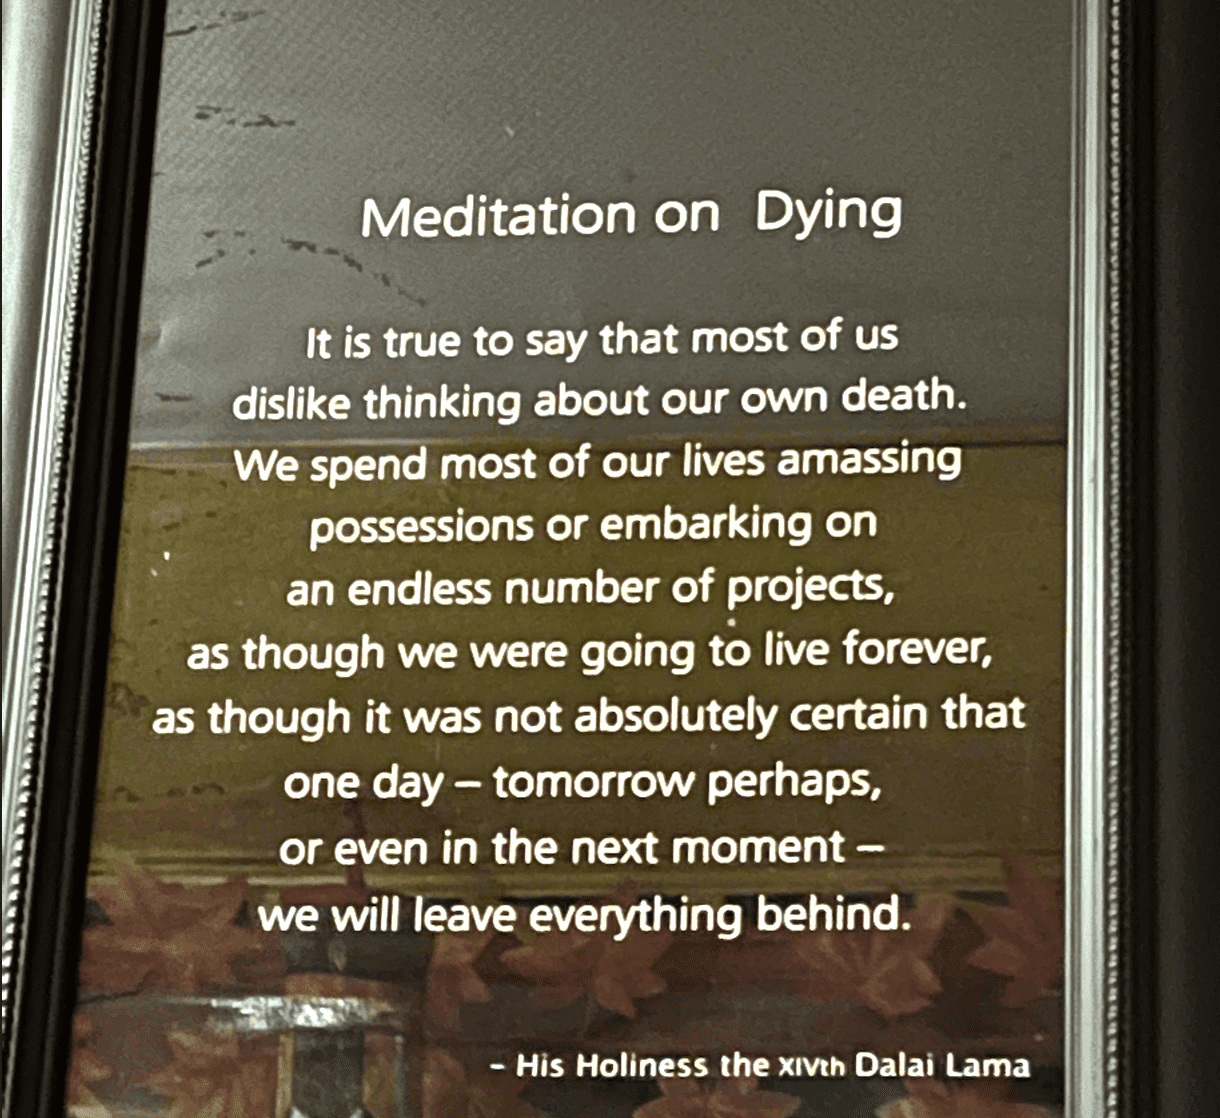 https://bram-adams.ghost.io/content/images/2023/02/meditation-on-dying-quote.png